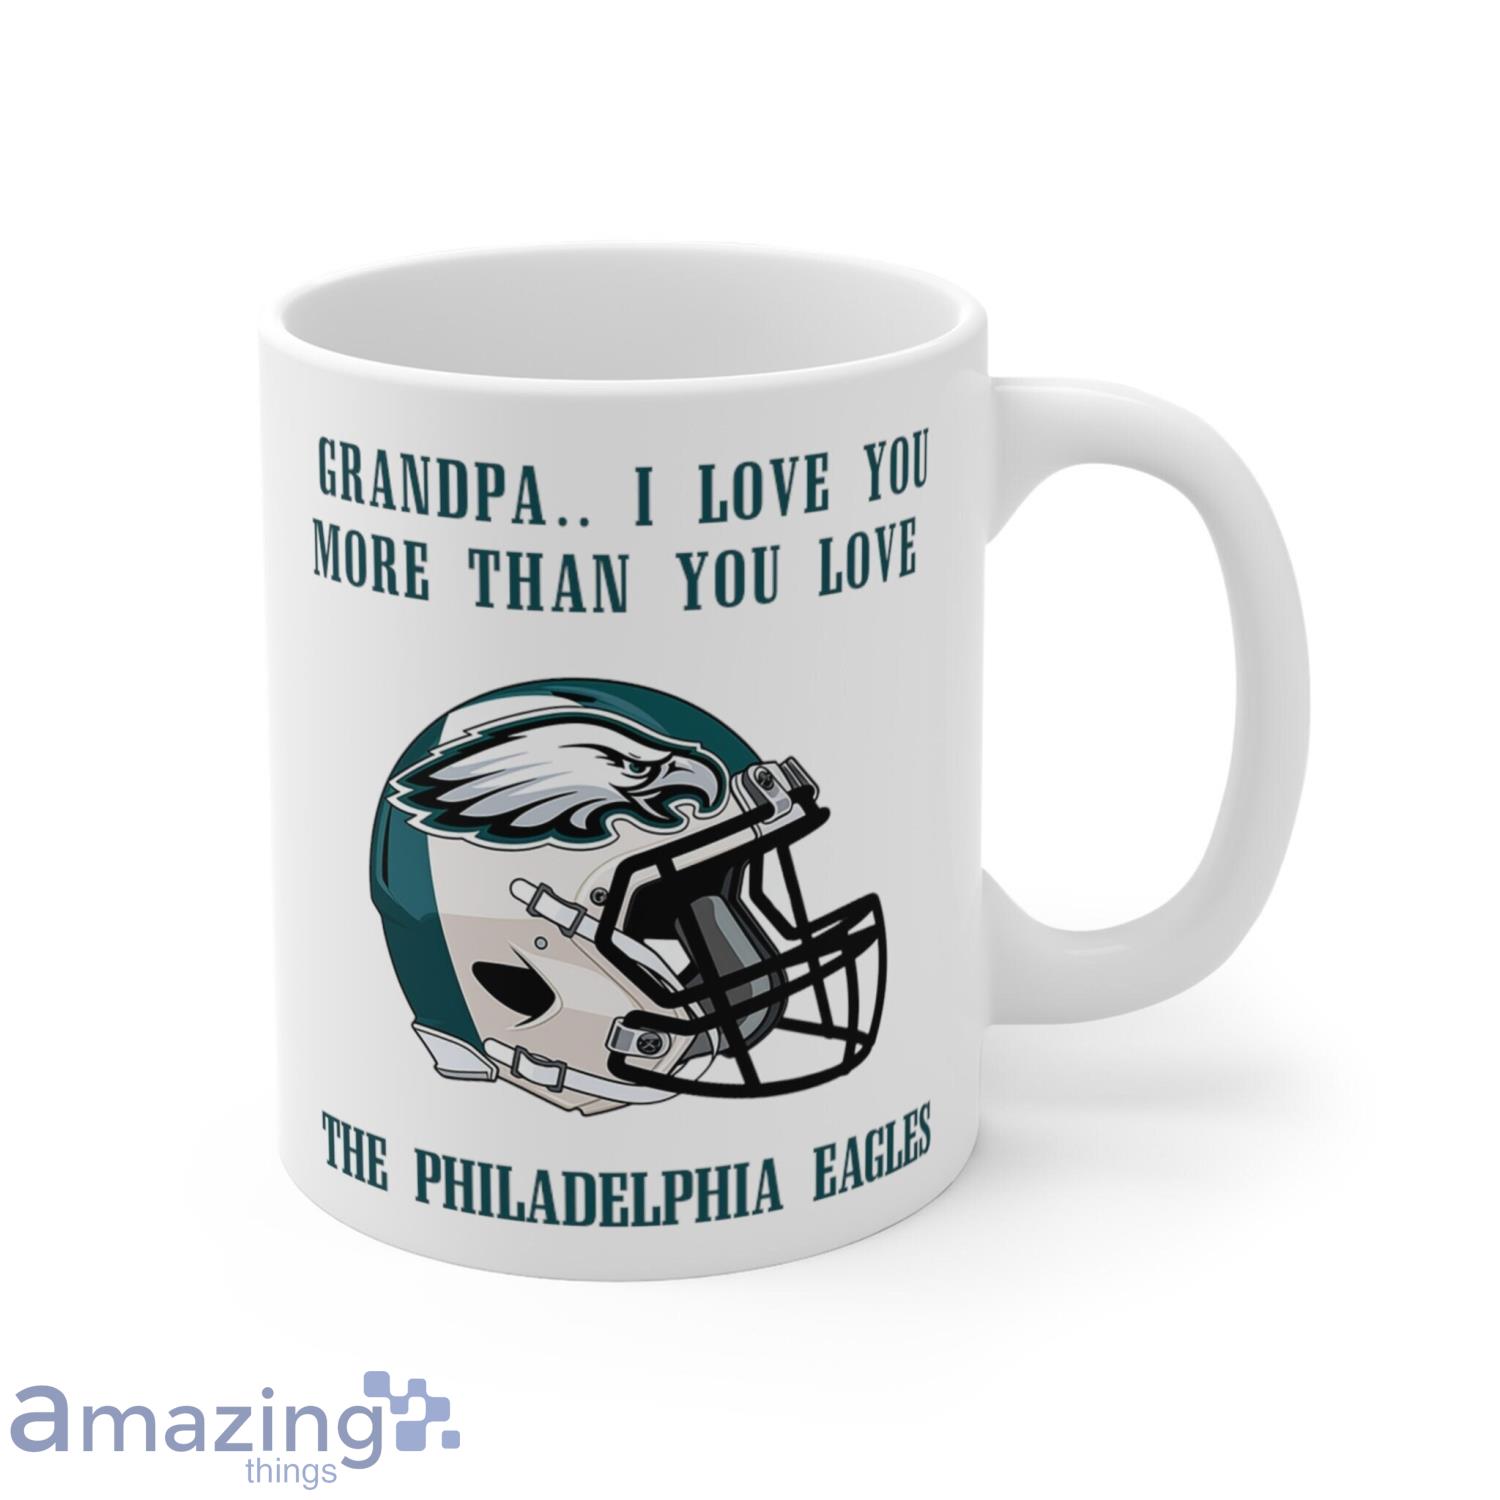 What's that? You want to see more - Philadelphia Eagles